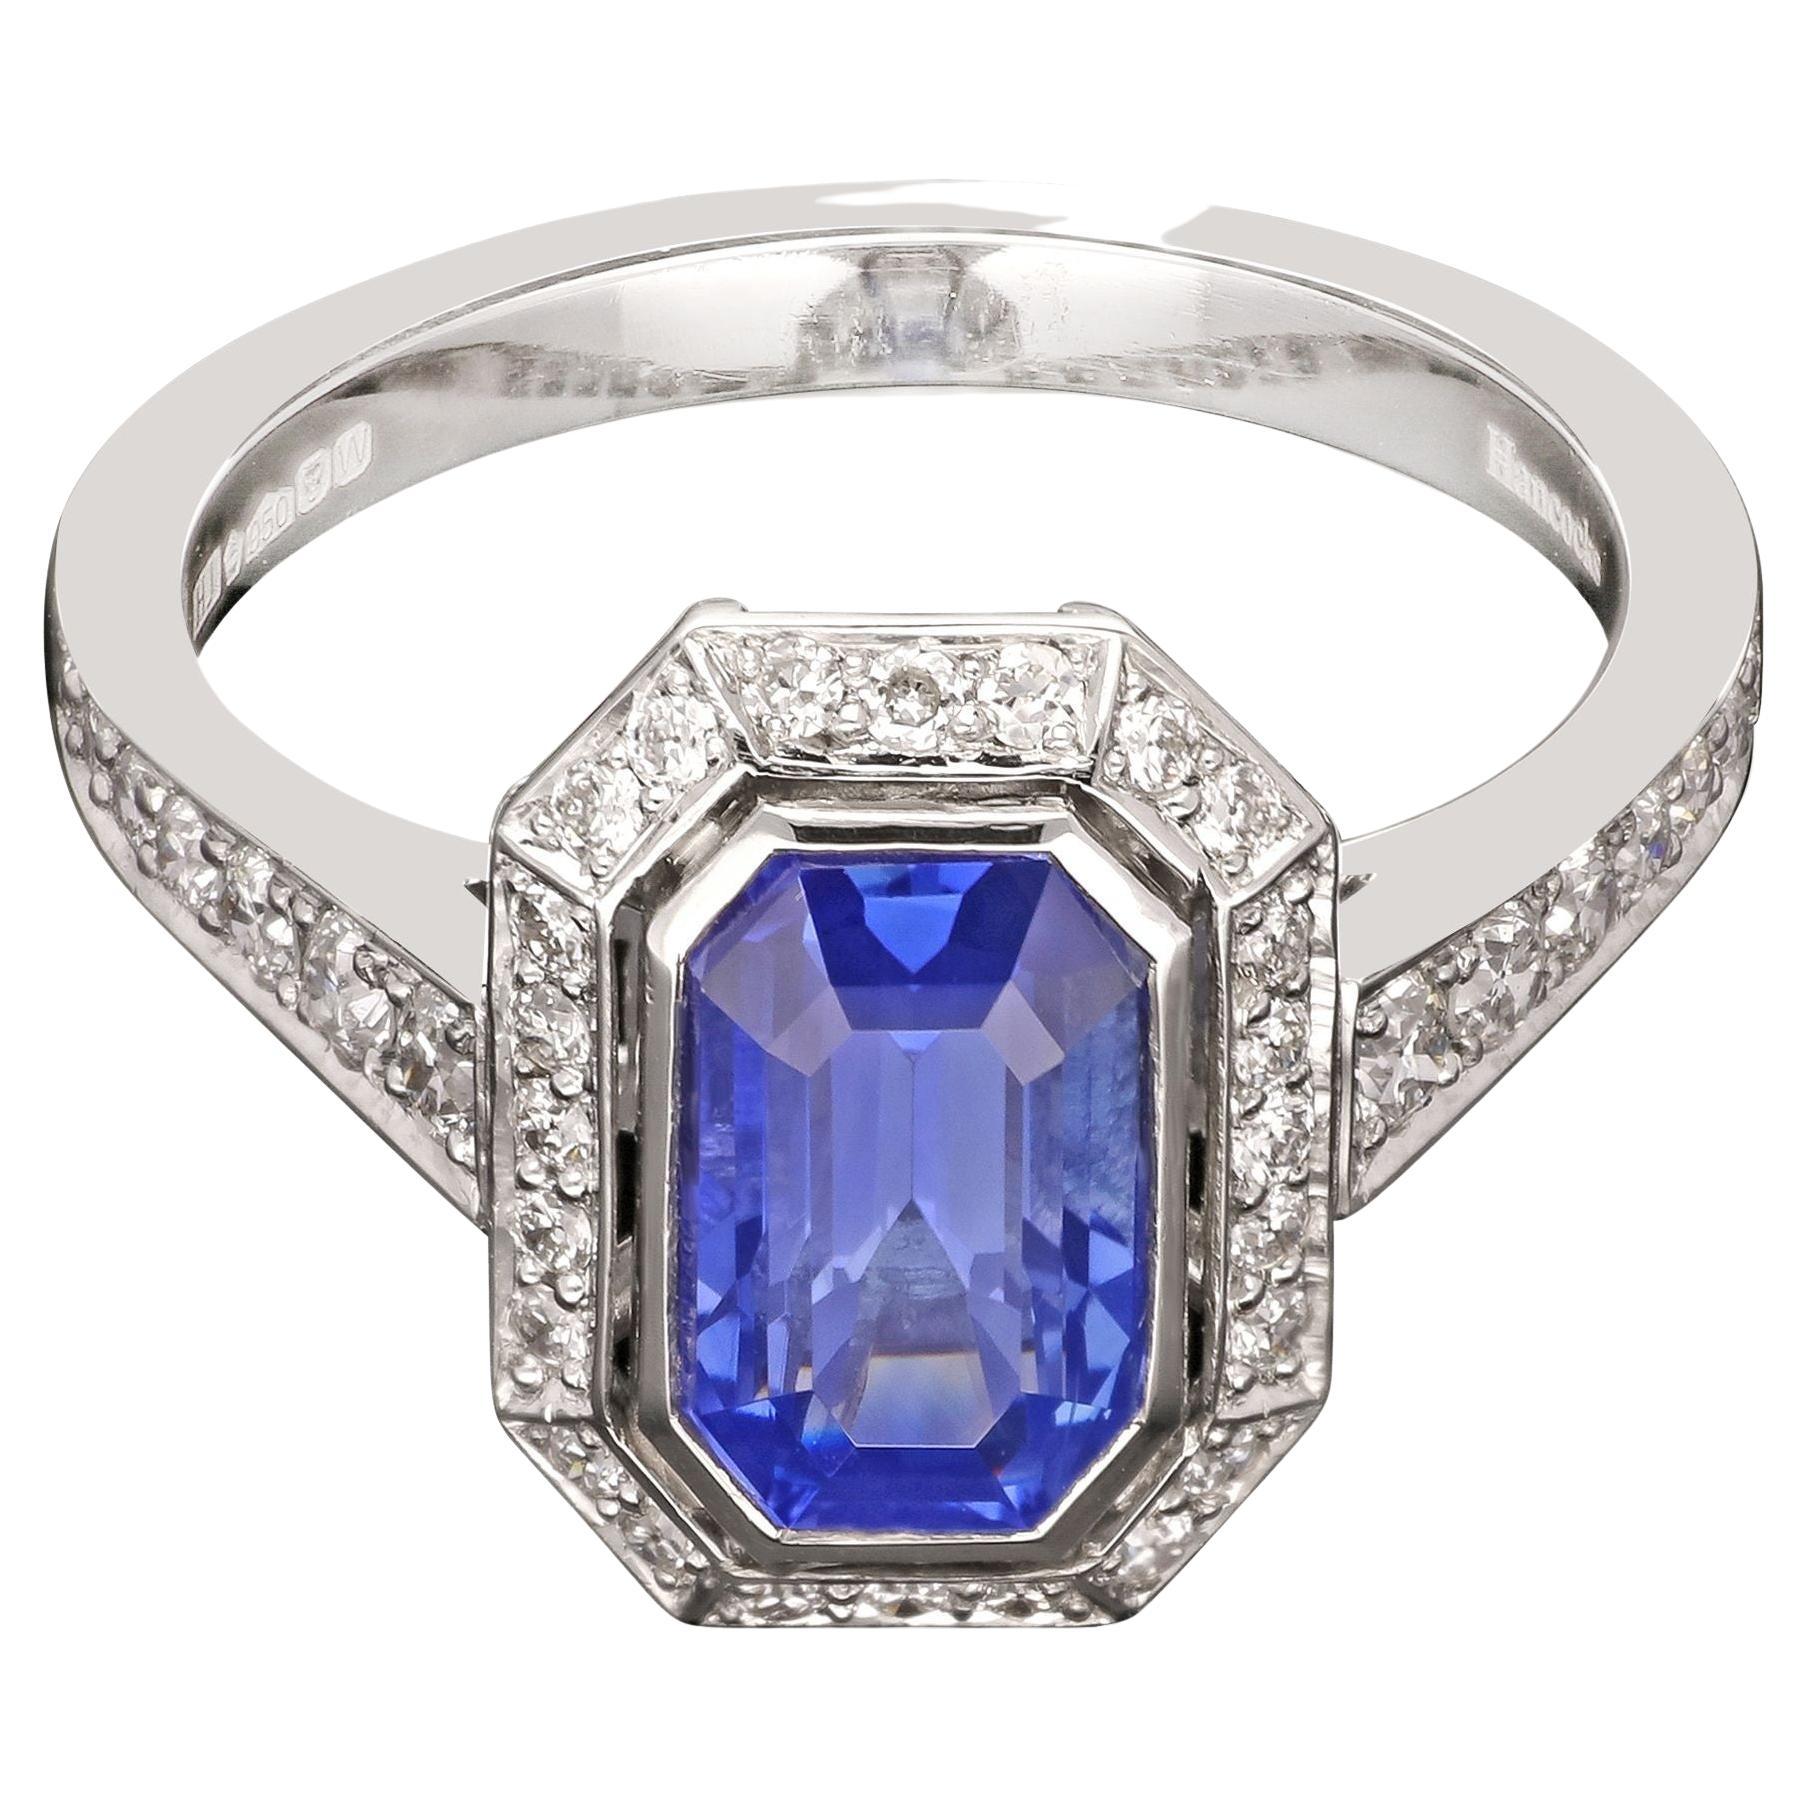 Hancocks 2.15ct Octagonal Step-Cut Sapphire Diamond Cluster Ring Contemporary For Sale